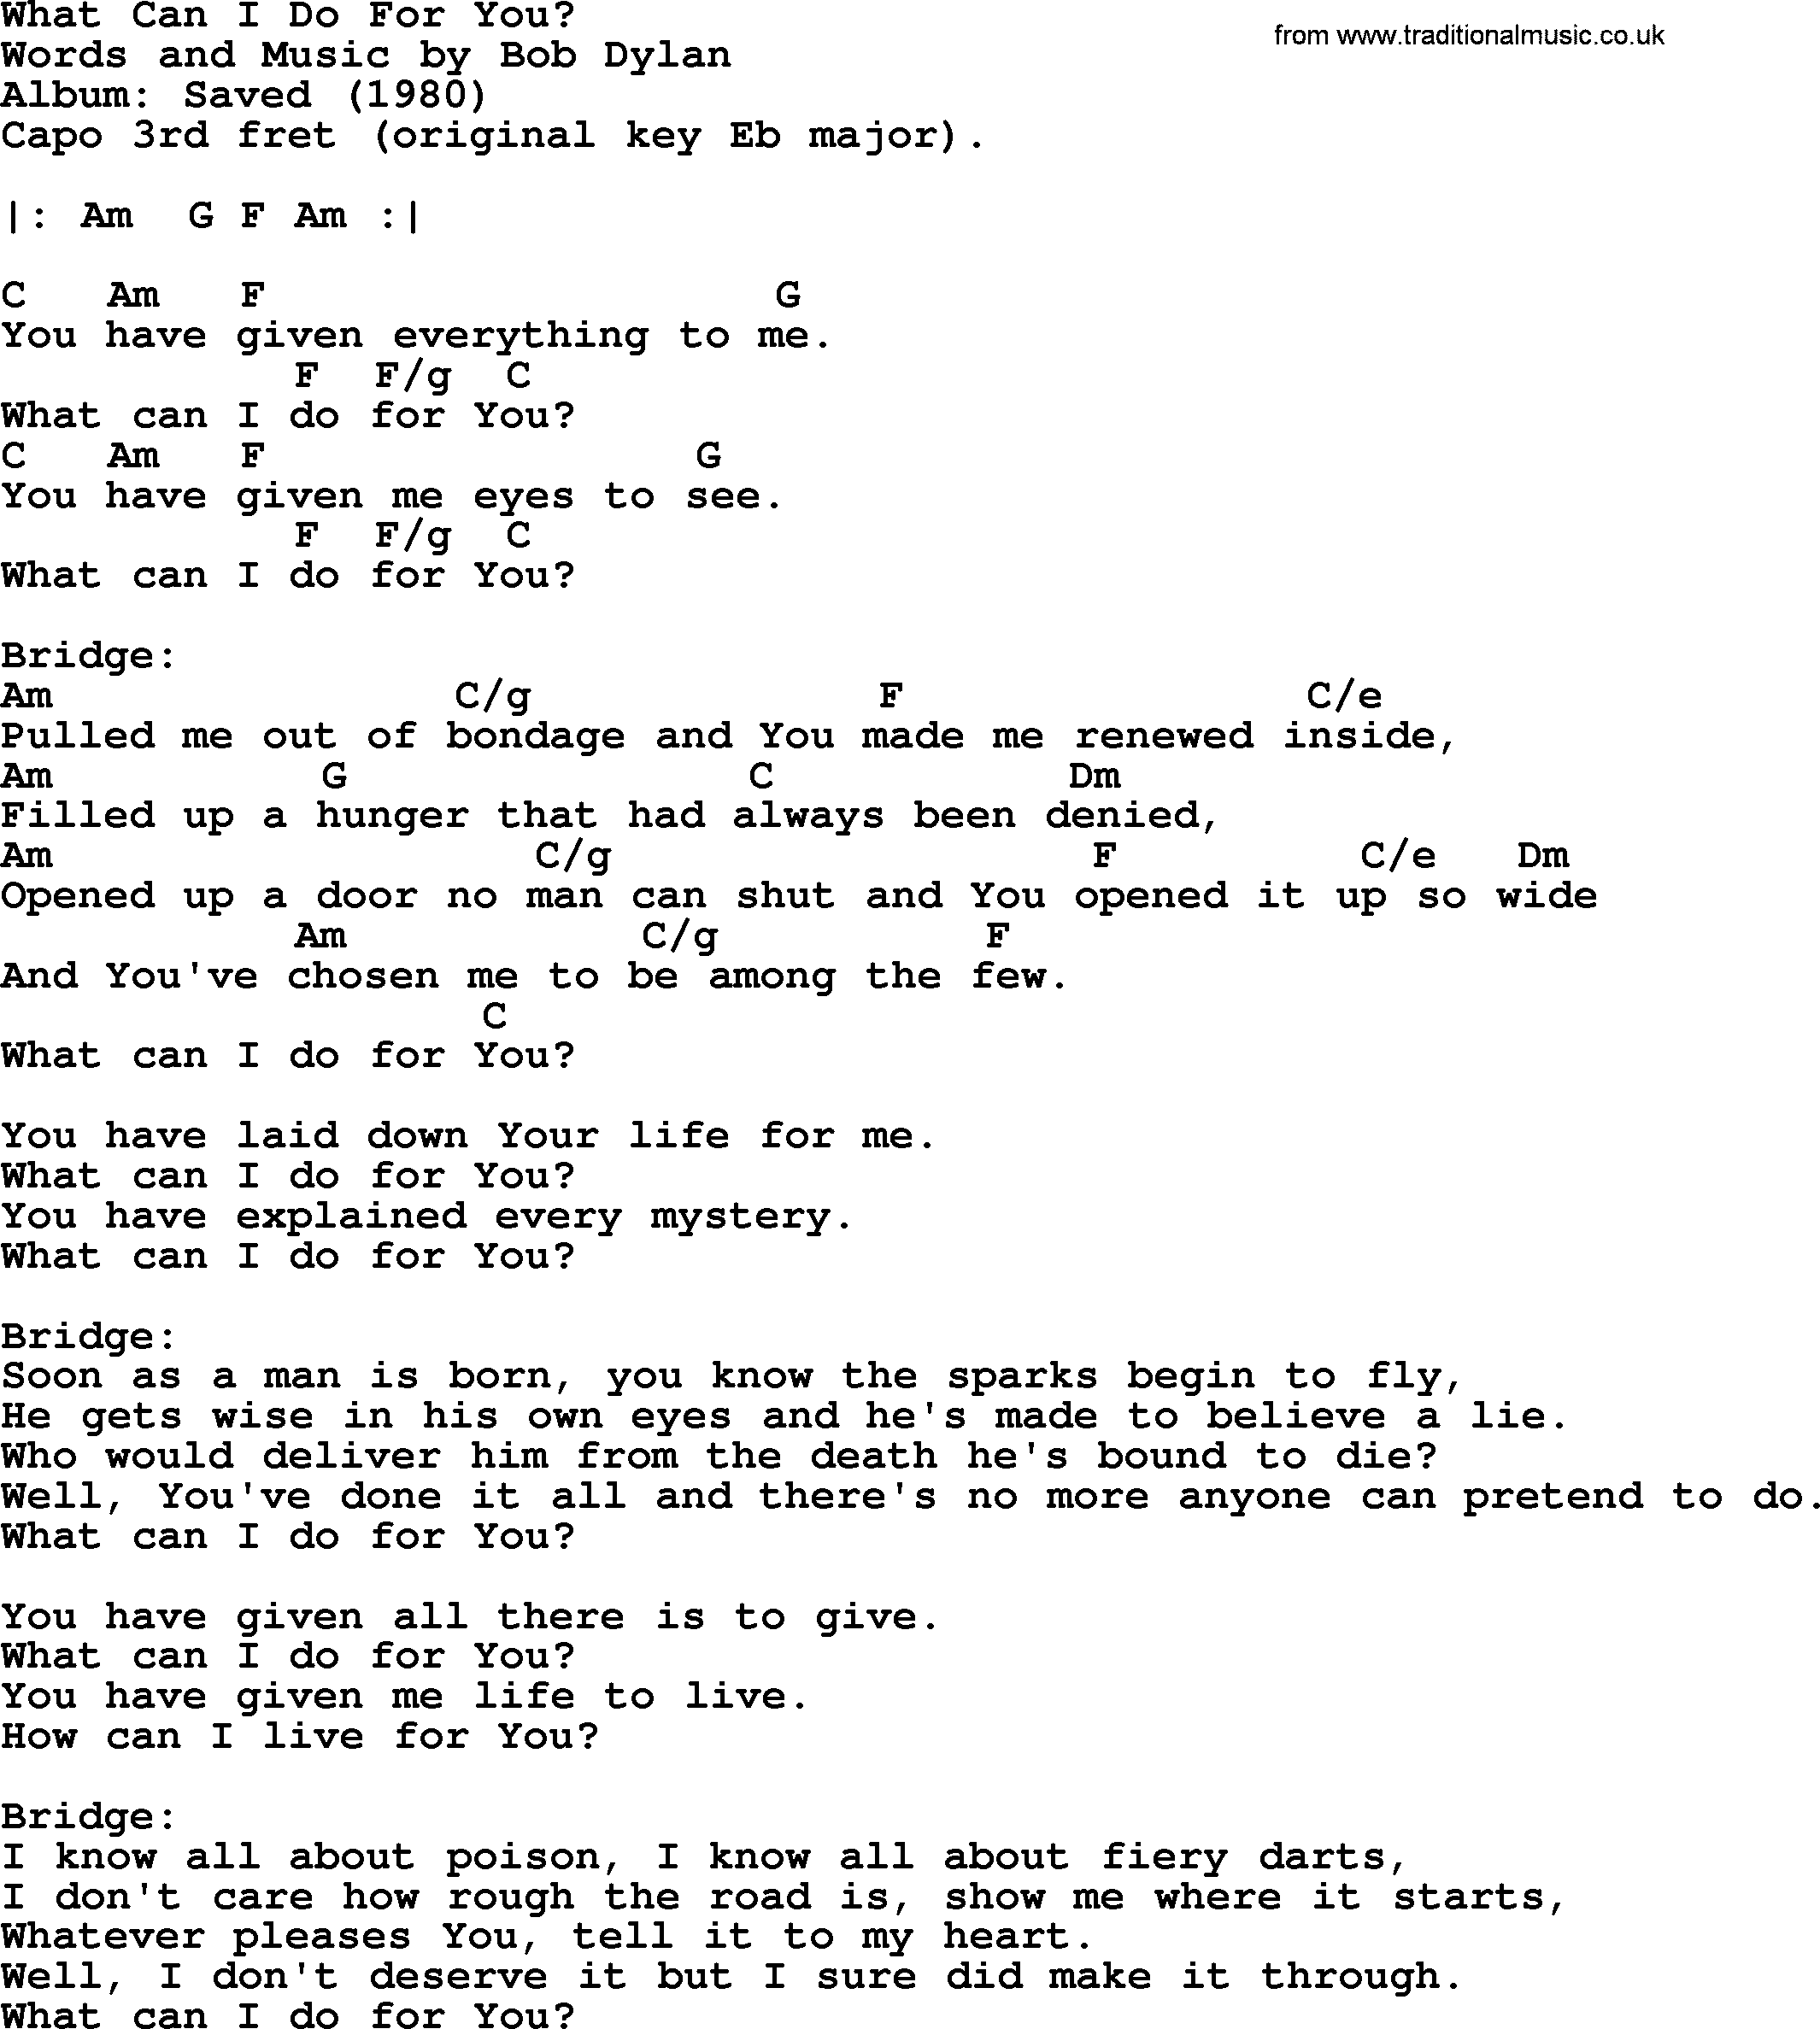 Bob Dylan song, lyrics with chords - What Can I Do For You